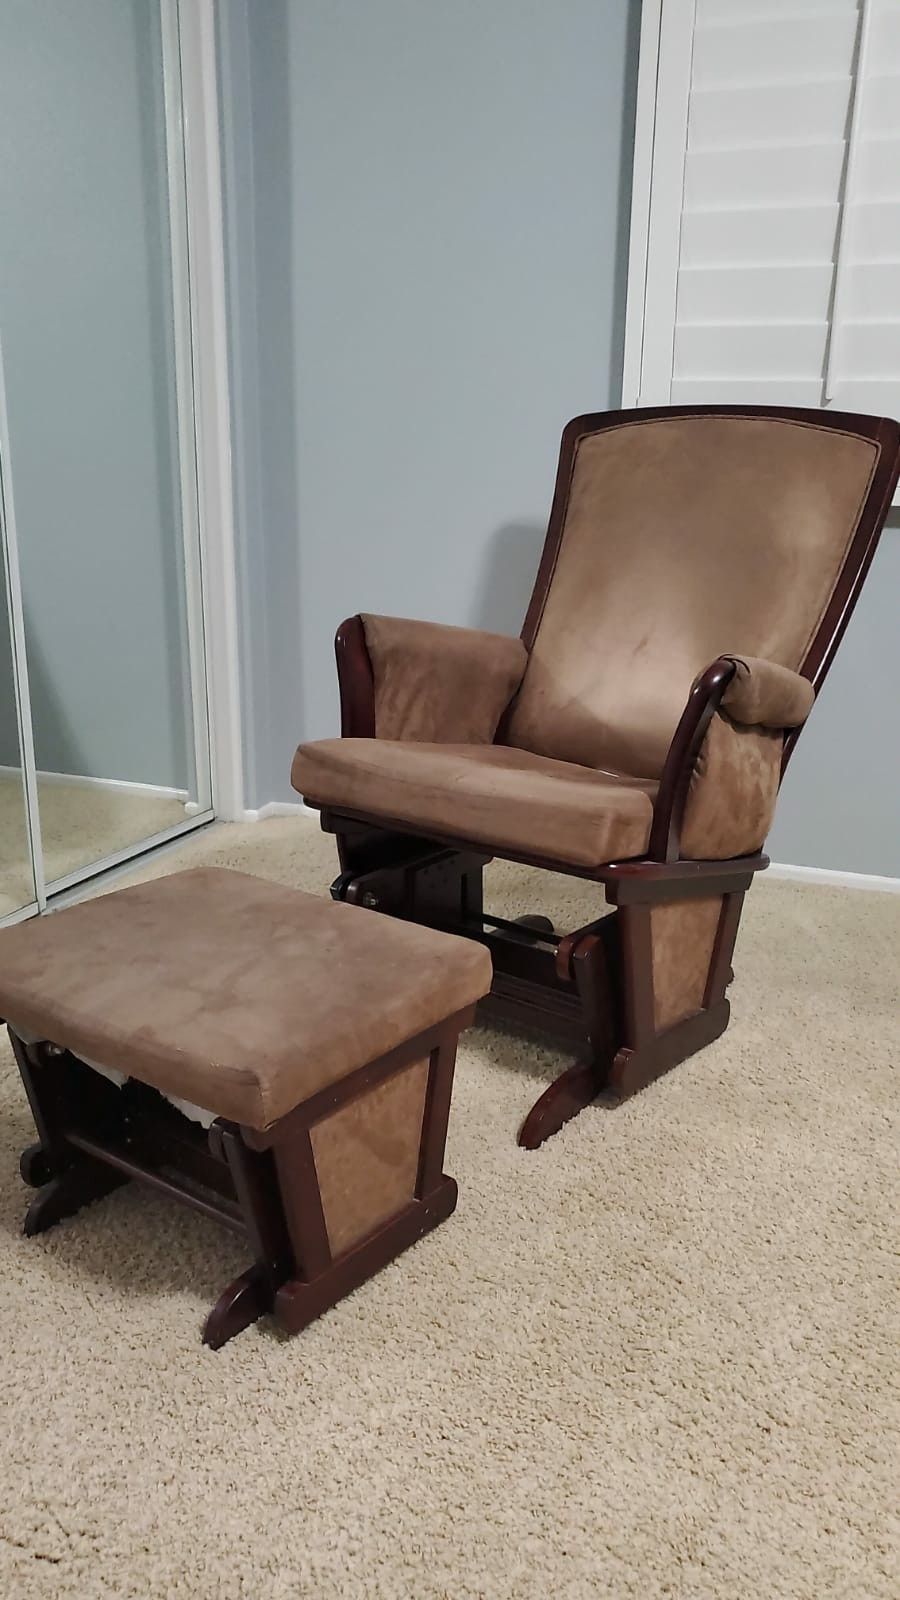 Glider chair and ottoman